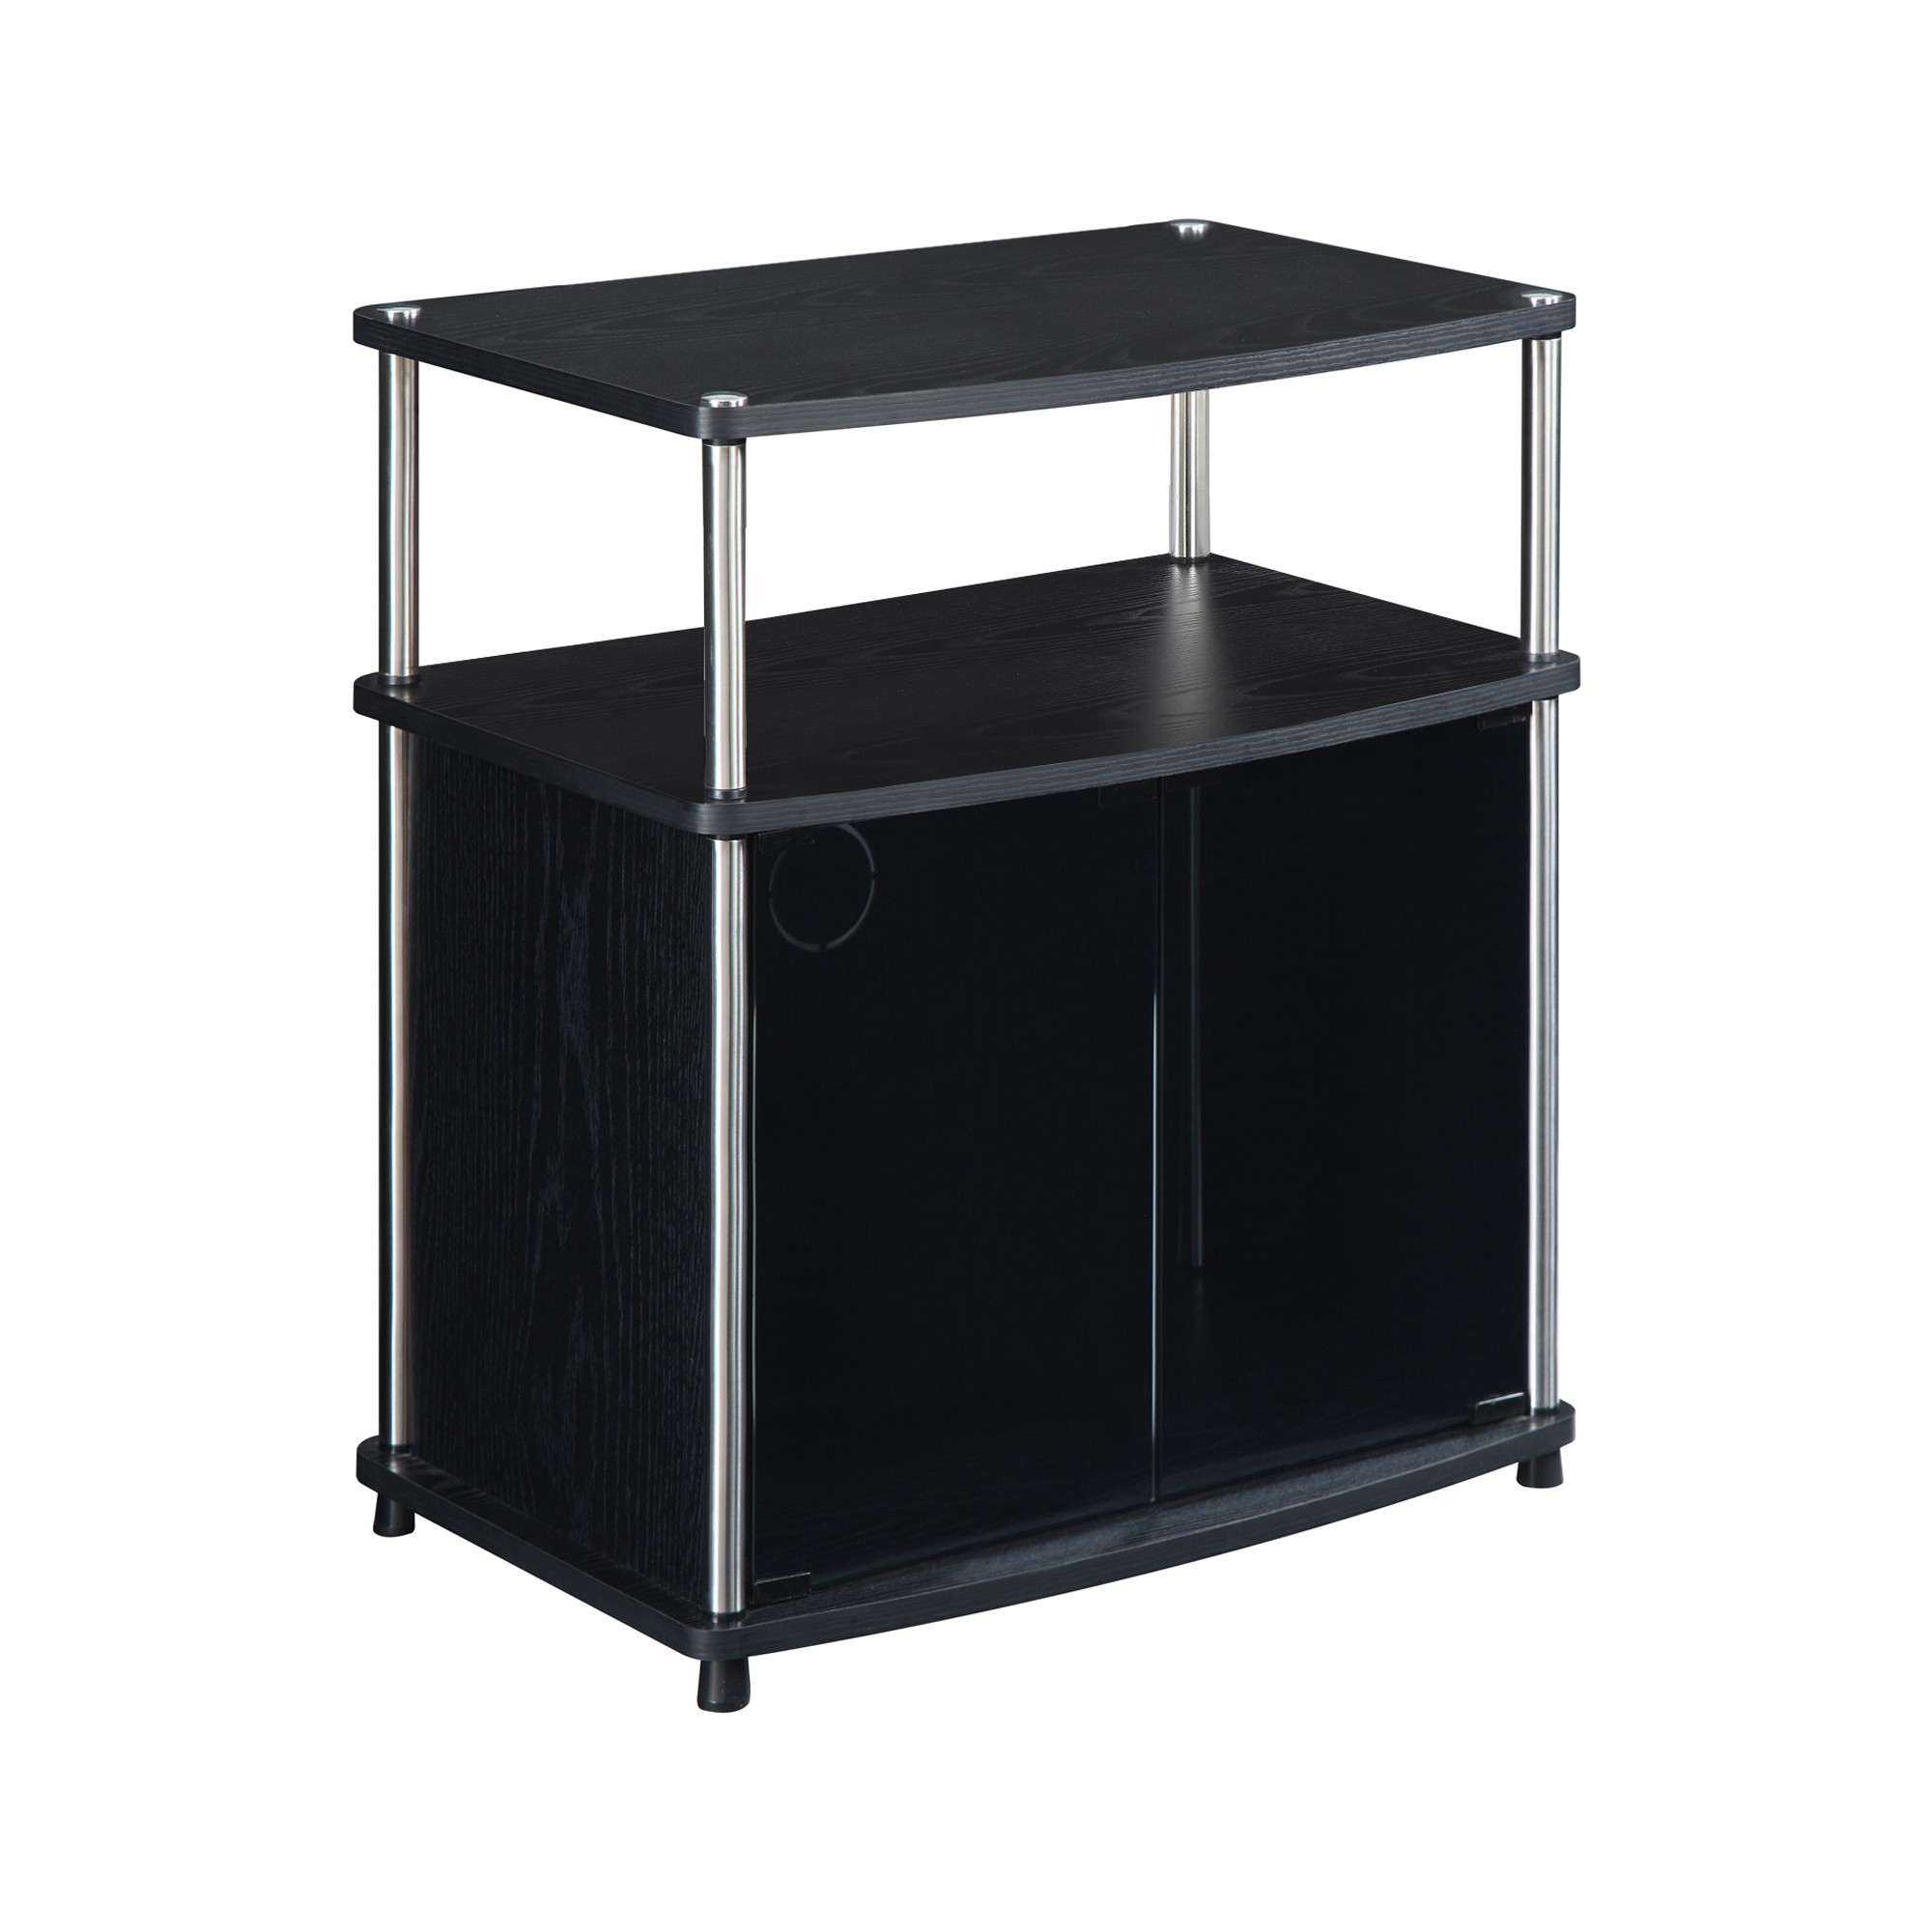 'TV Stand with Glass Doors Black 24'' - Convenience Concepts'